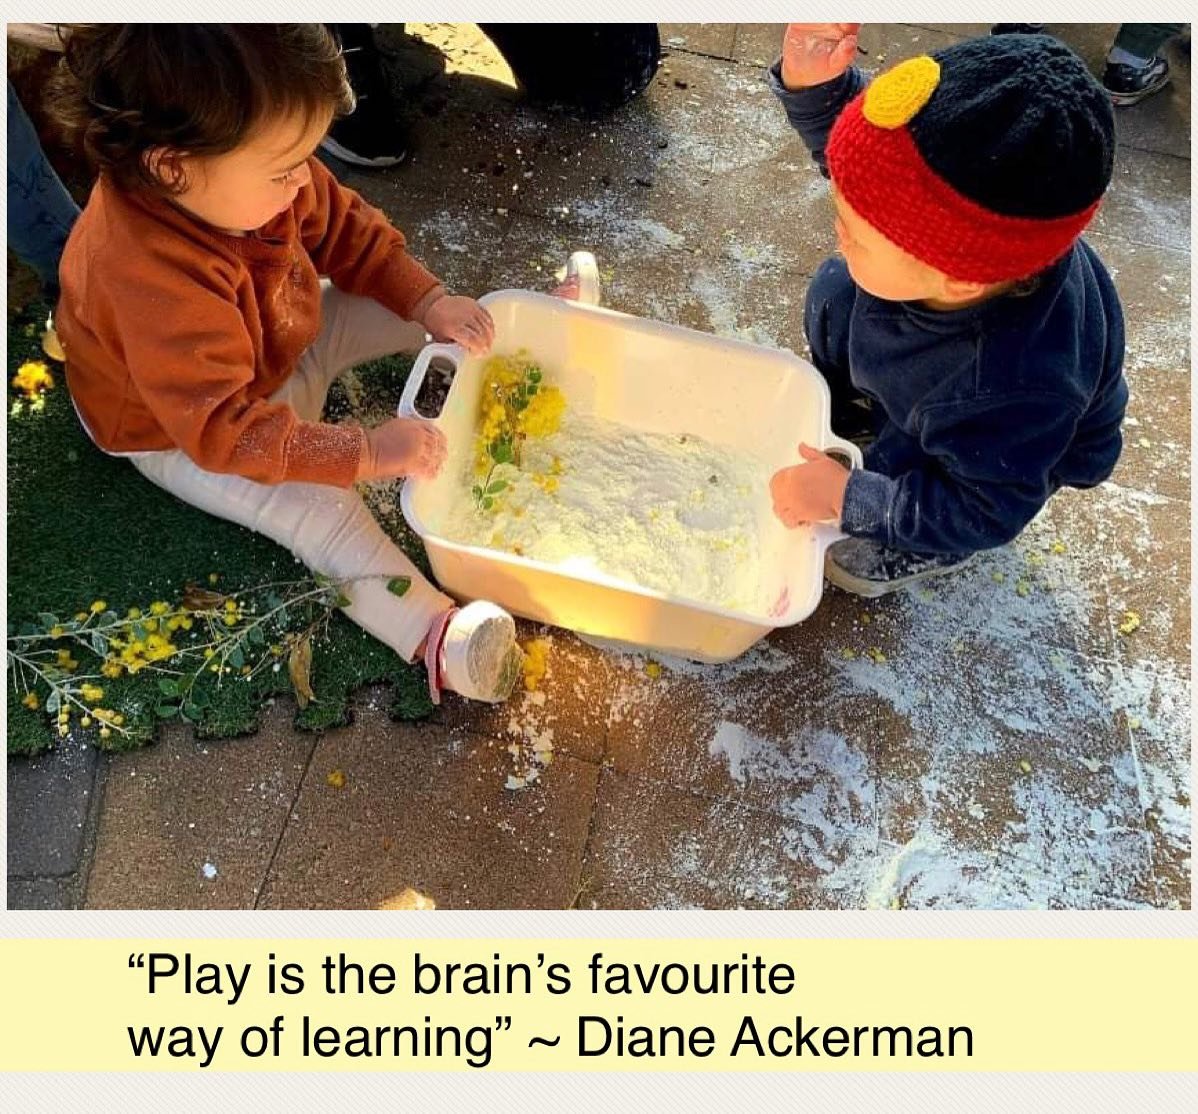 We acknowledge play as an essential element to children&rsquo;s learning and development. Play is unique to each child and allows children to explore and make sense of their world.